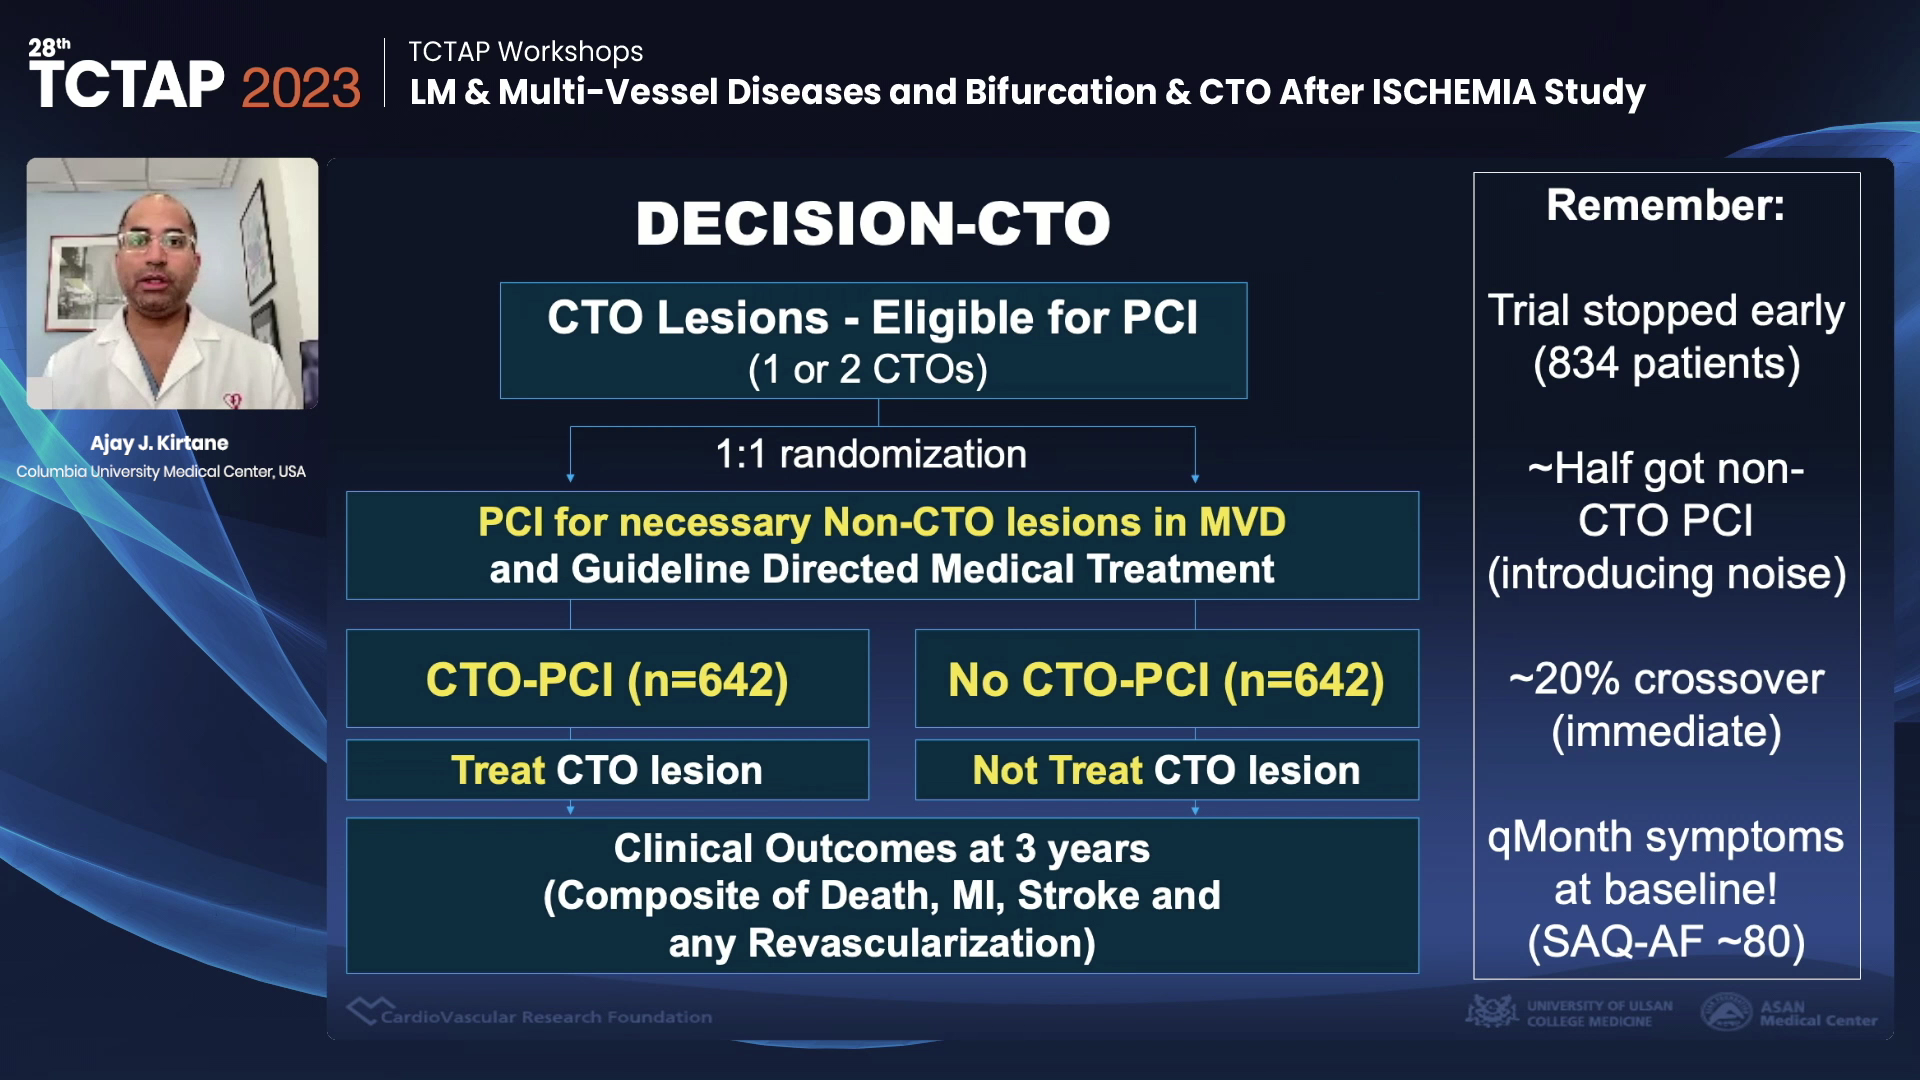 [TCTAP Workshops] LM & Multi-Vessel Diseases and Bifurcation & CTO After ISCHEMIA Study